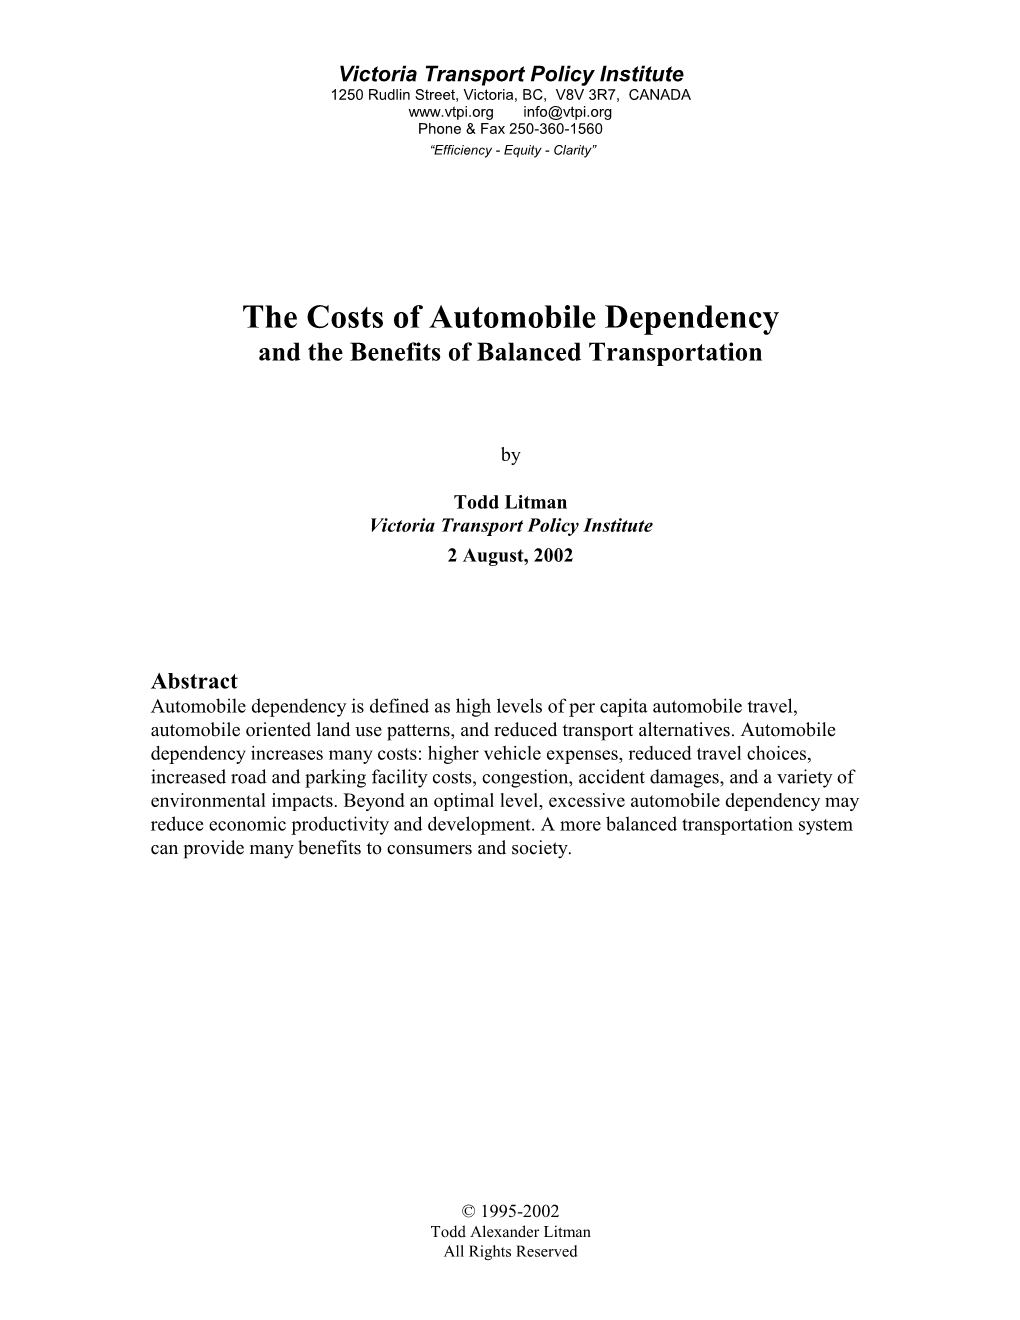 The Costs of Automobile Dependency and the Benefits of Balanced Transportation